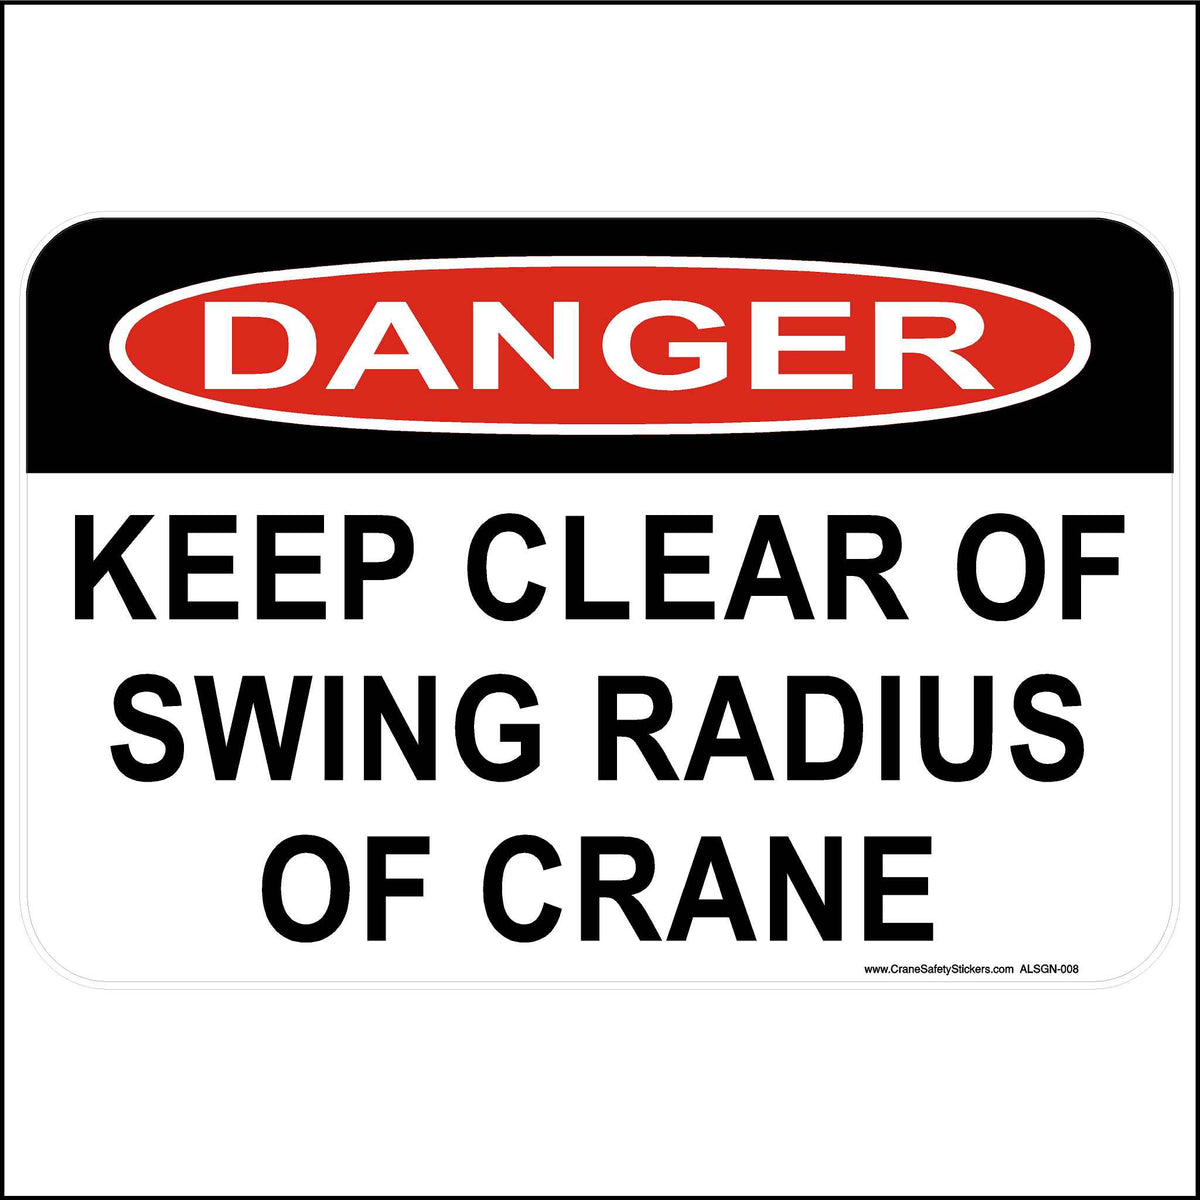 Danger keep clear of swing radius of crane safety sign.